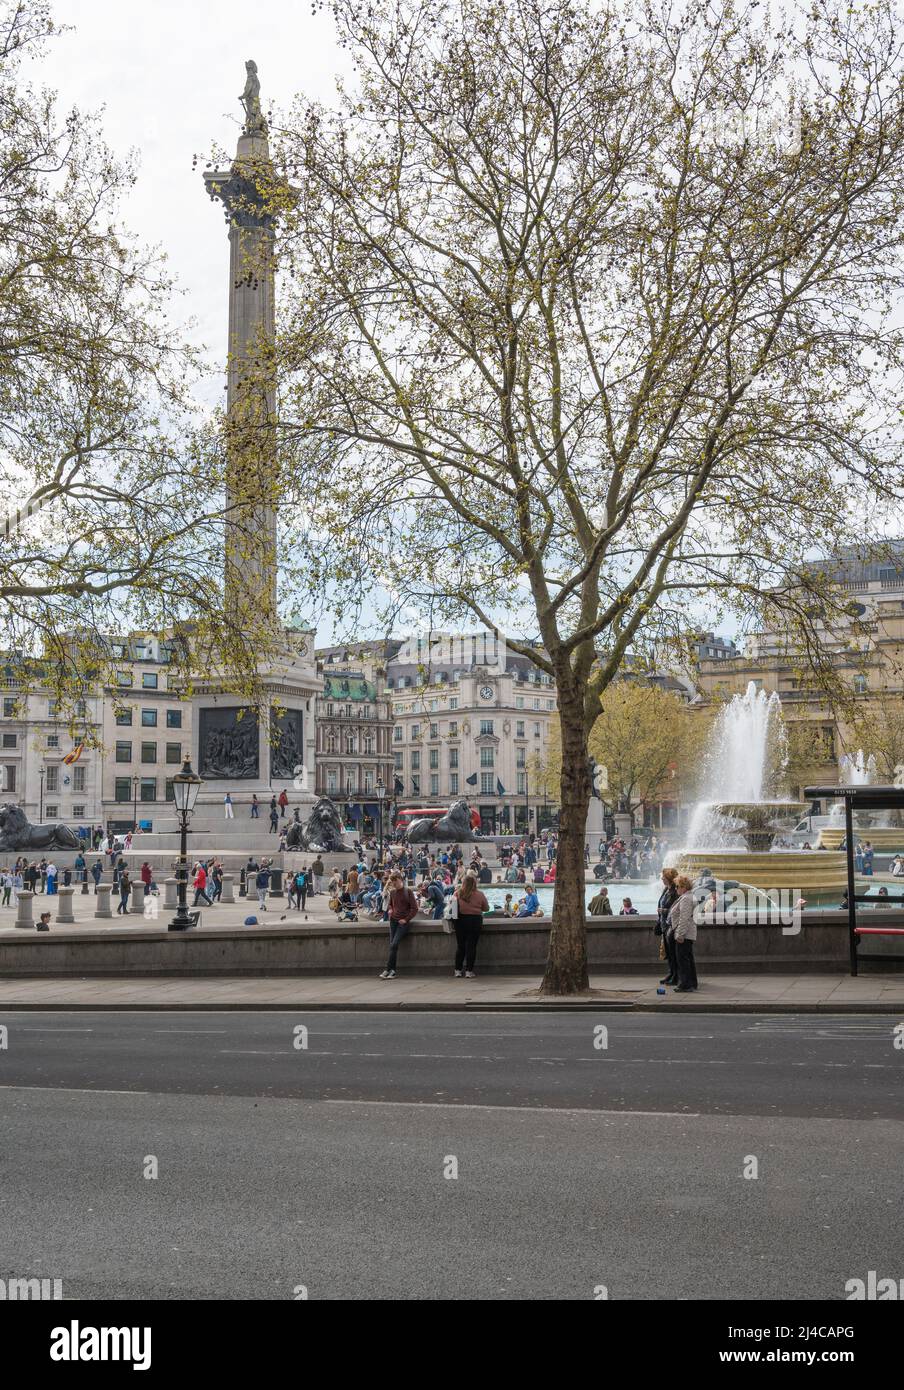 People out and about on a warm springtime day in Trafalgar Square. London, England, UK Stock Photo